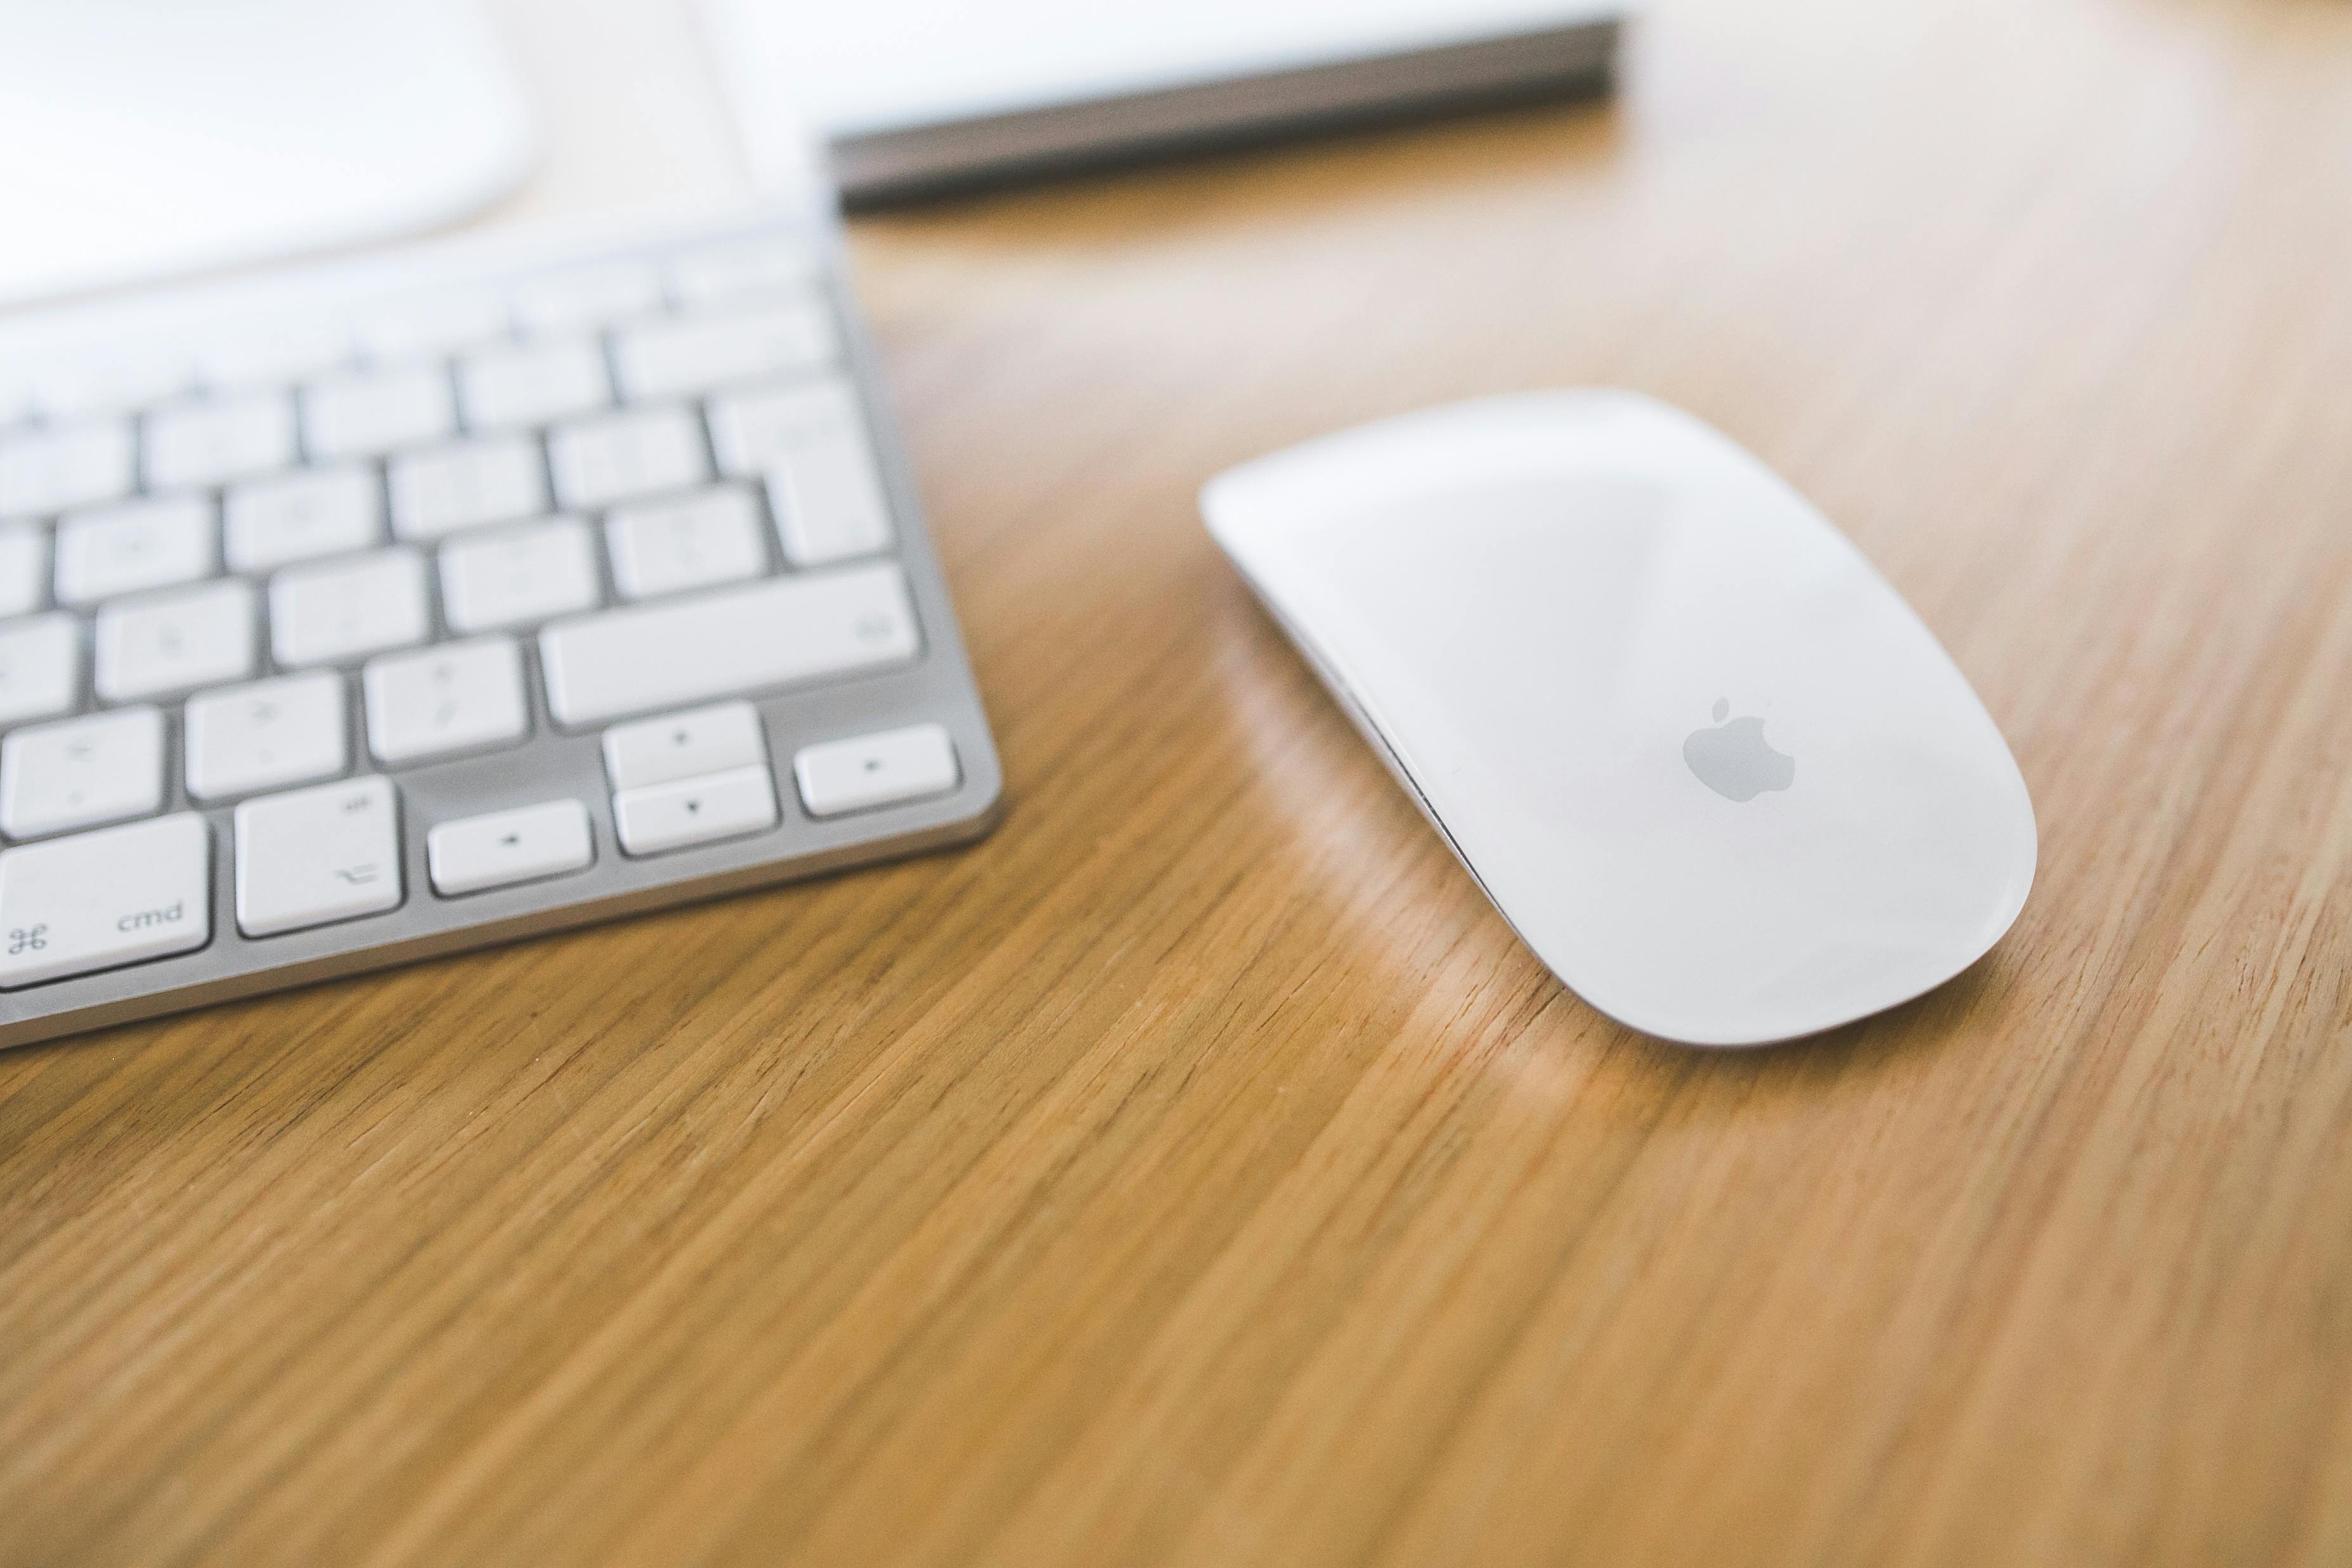 do you need apple keyboard and mouse for imac